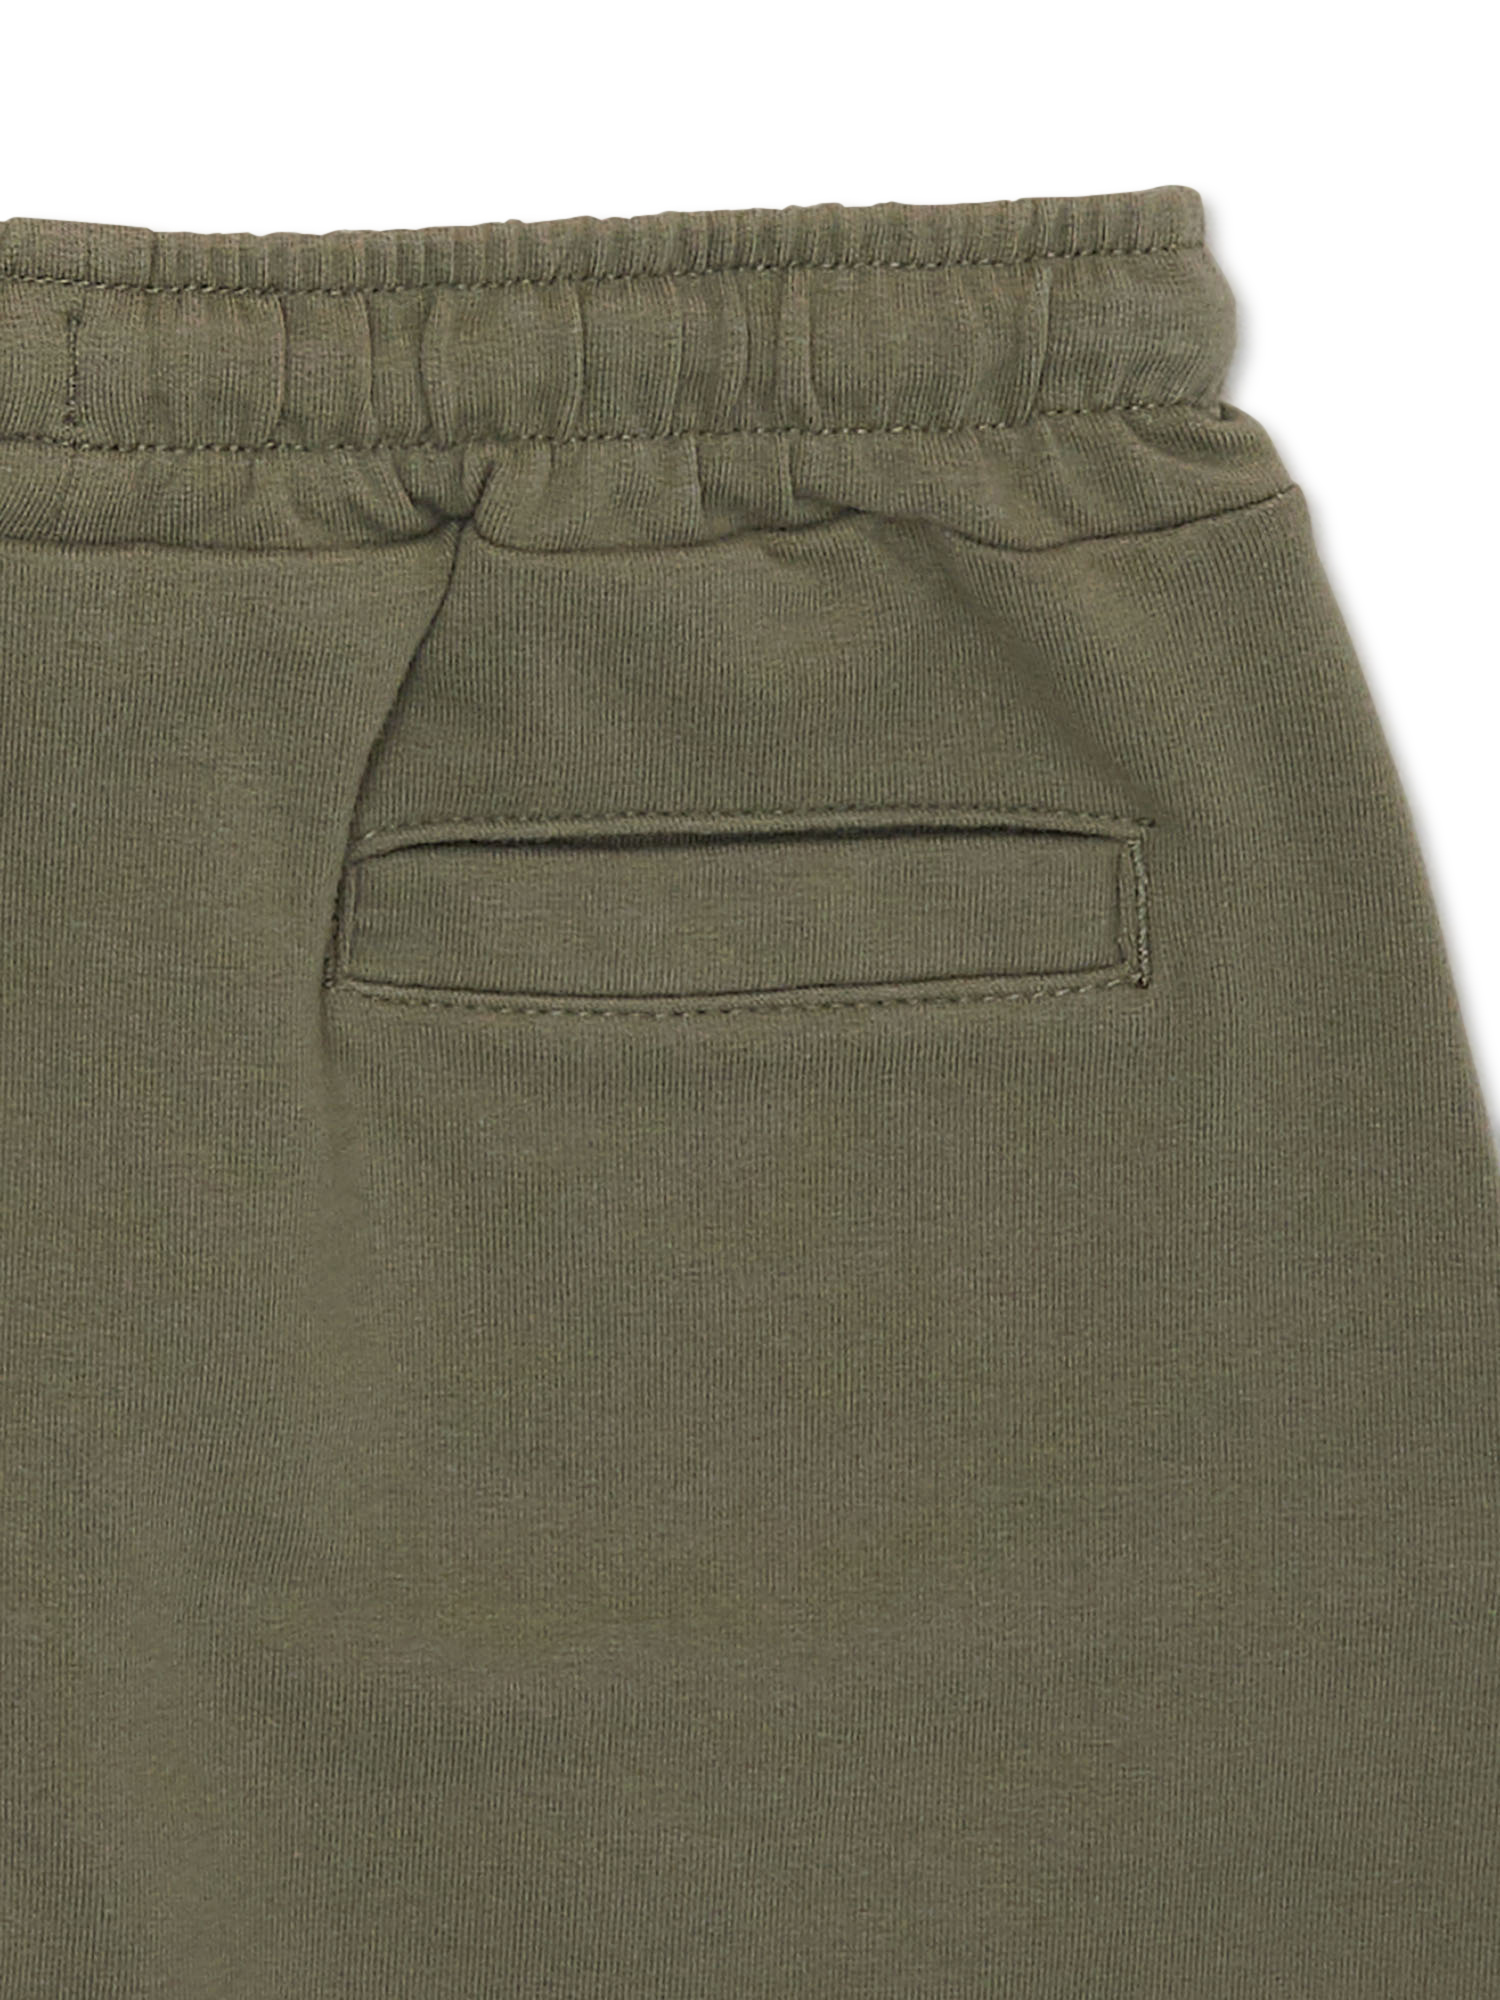 easy-peasy Toddler Boy French Terry Cargo Shorts, Sizes 12 Months-5T - image 3 of 5